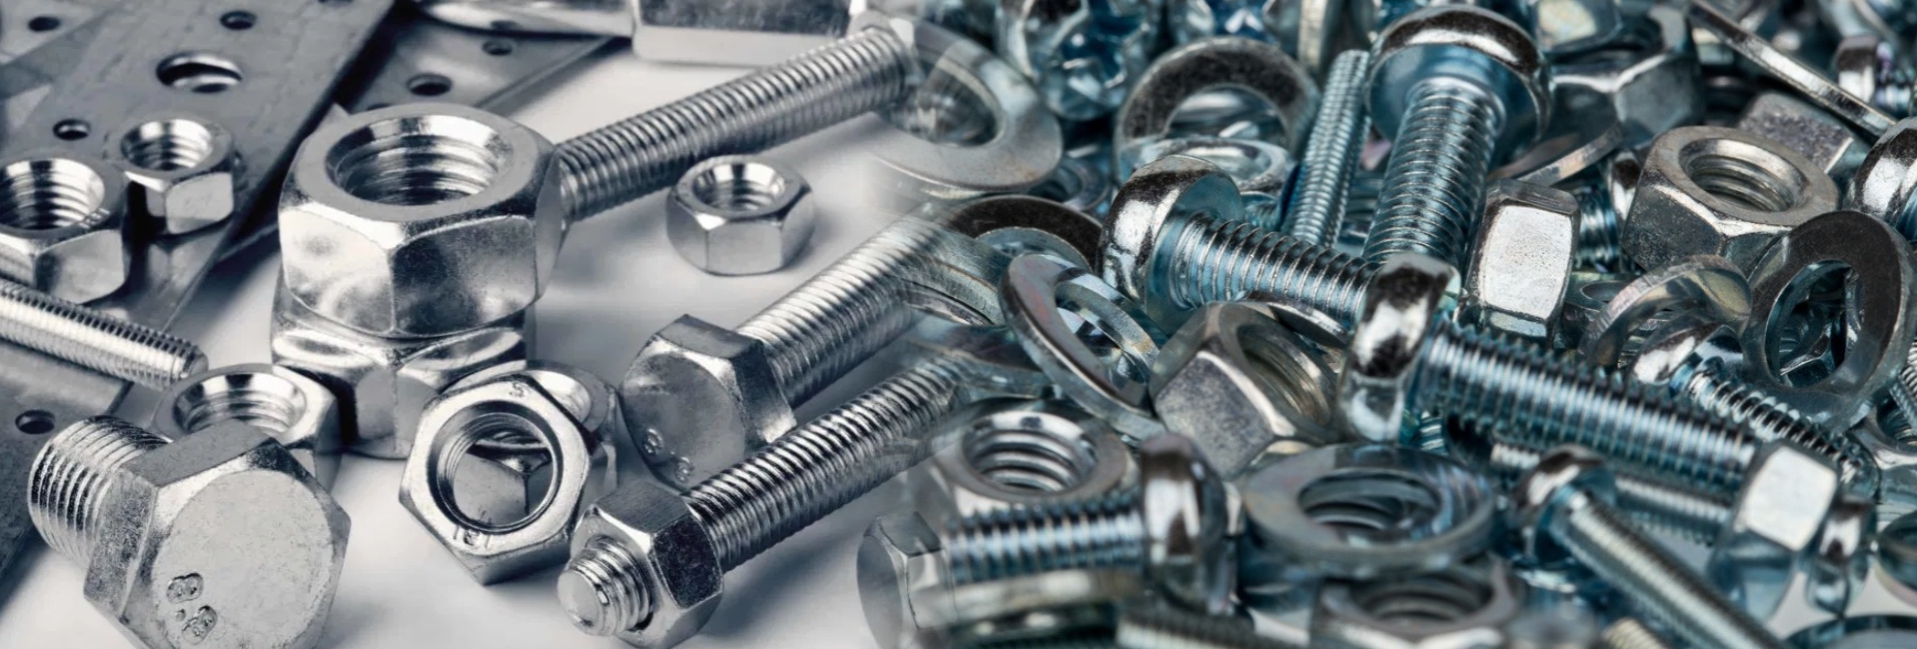 Best quality Fasteners manufacturers in Ludhiana Punjab India